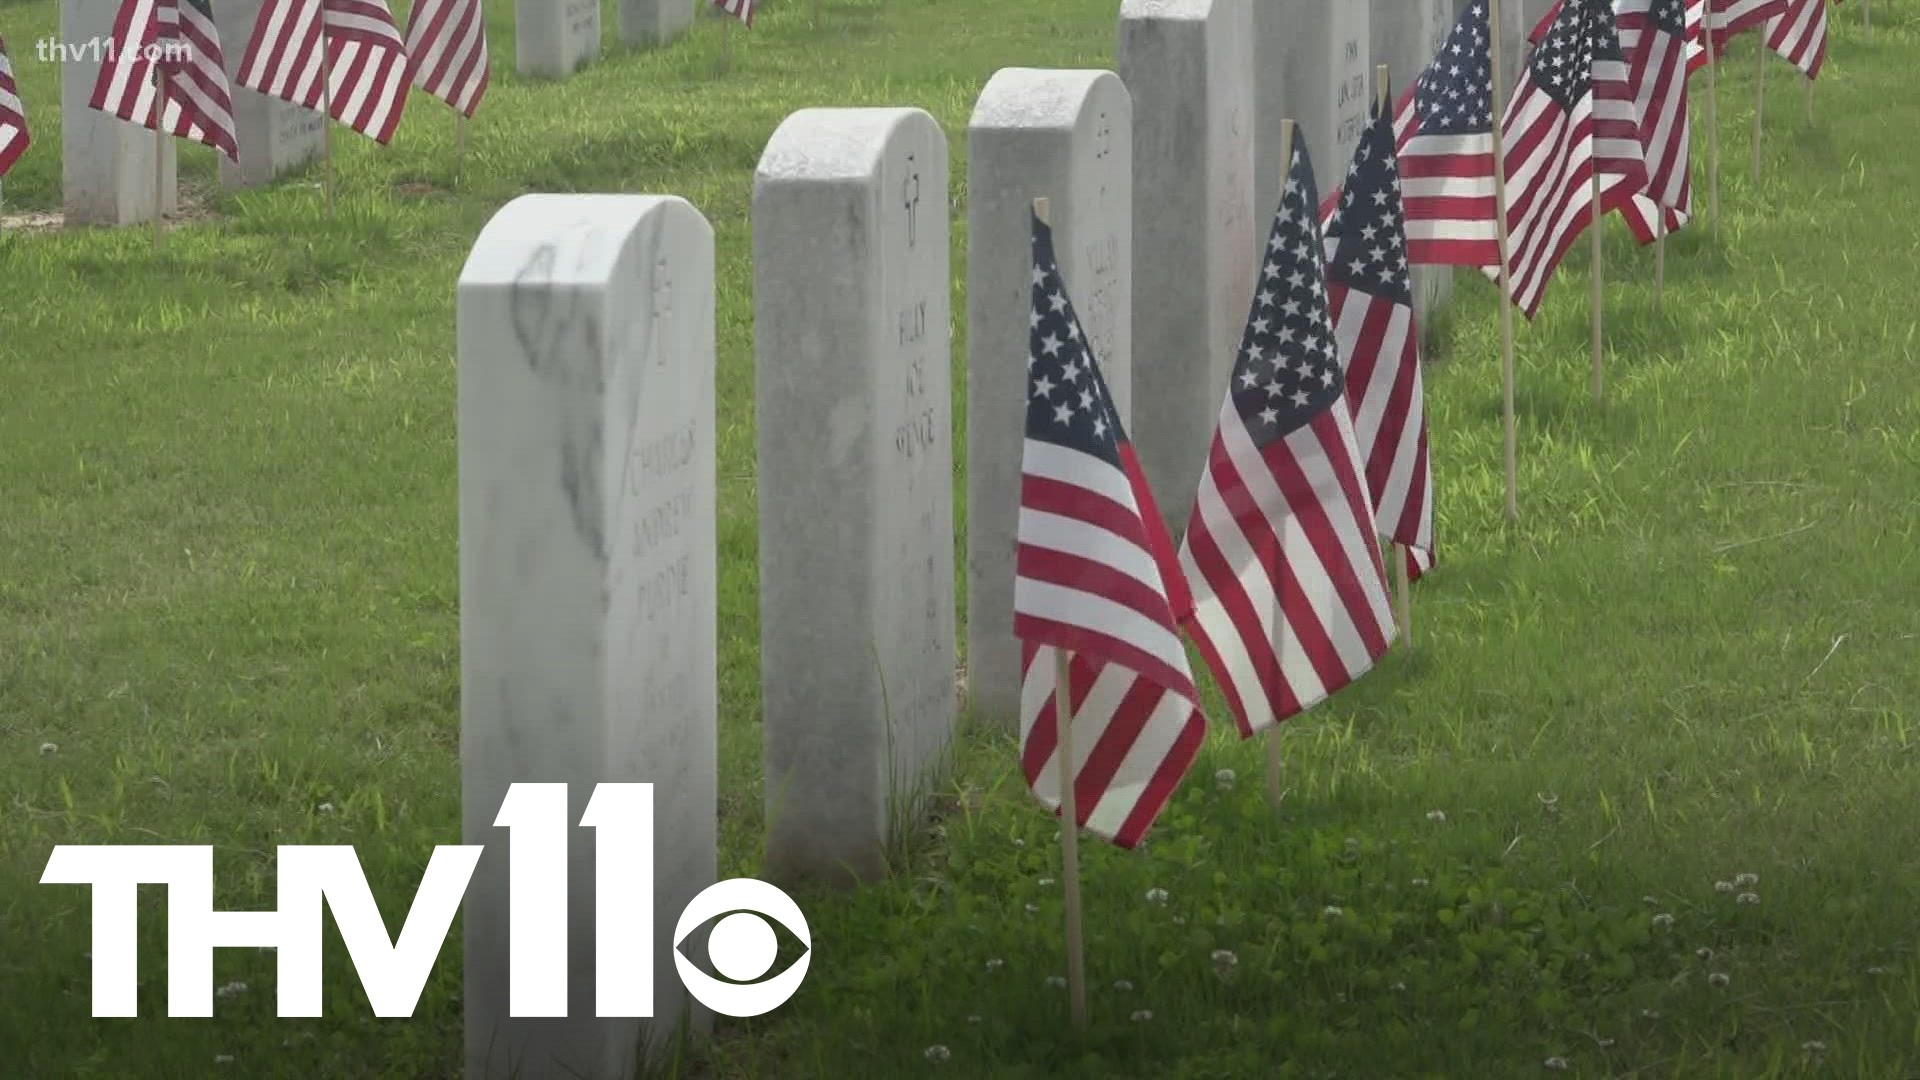 The Arkansas State Veterans Cemetery in North Little Rock held their annual Memorial Day event Monday morning.